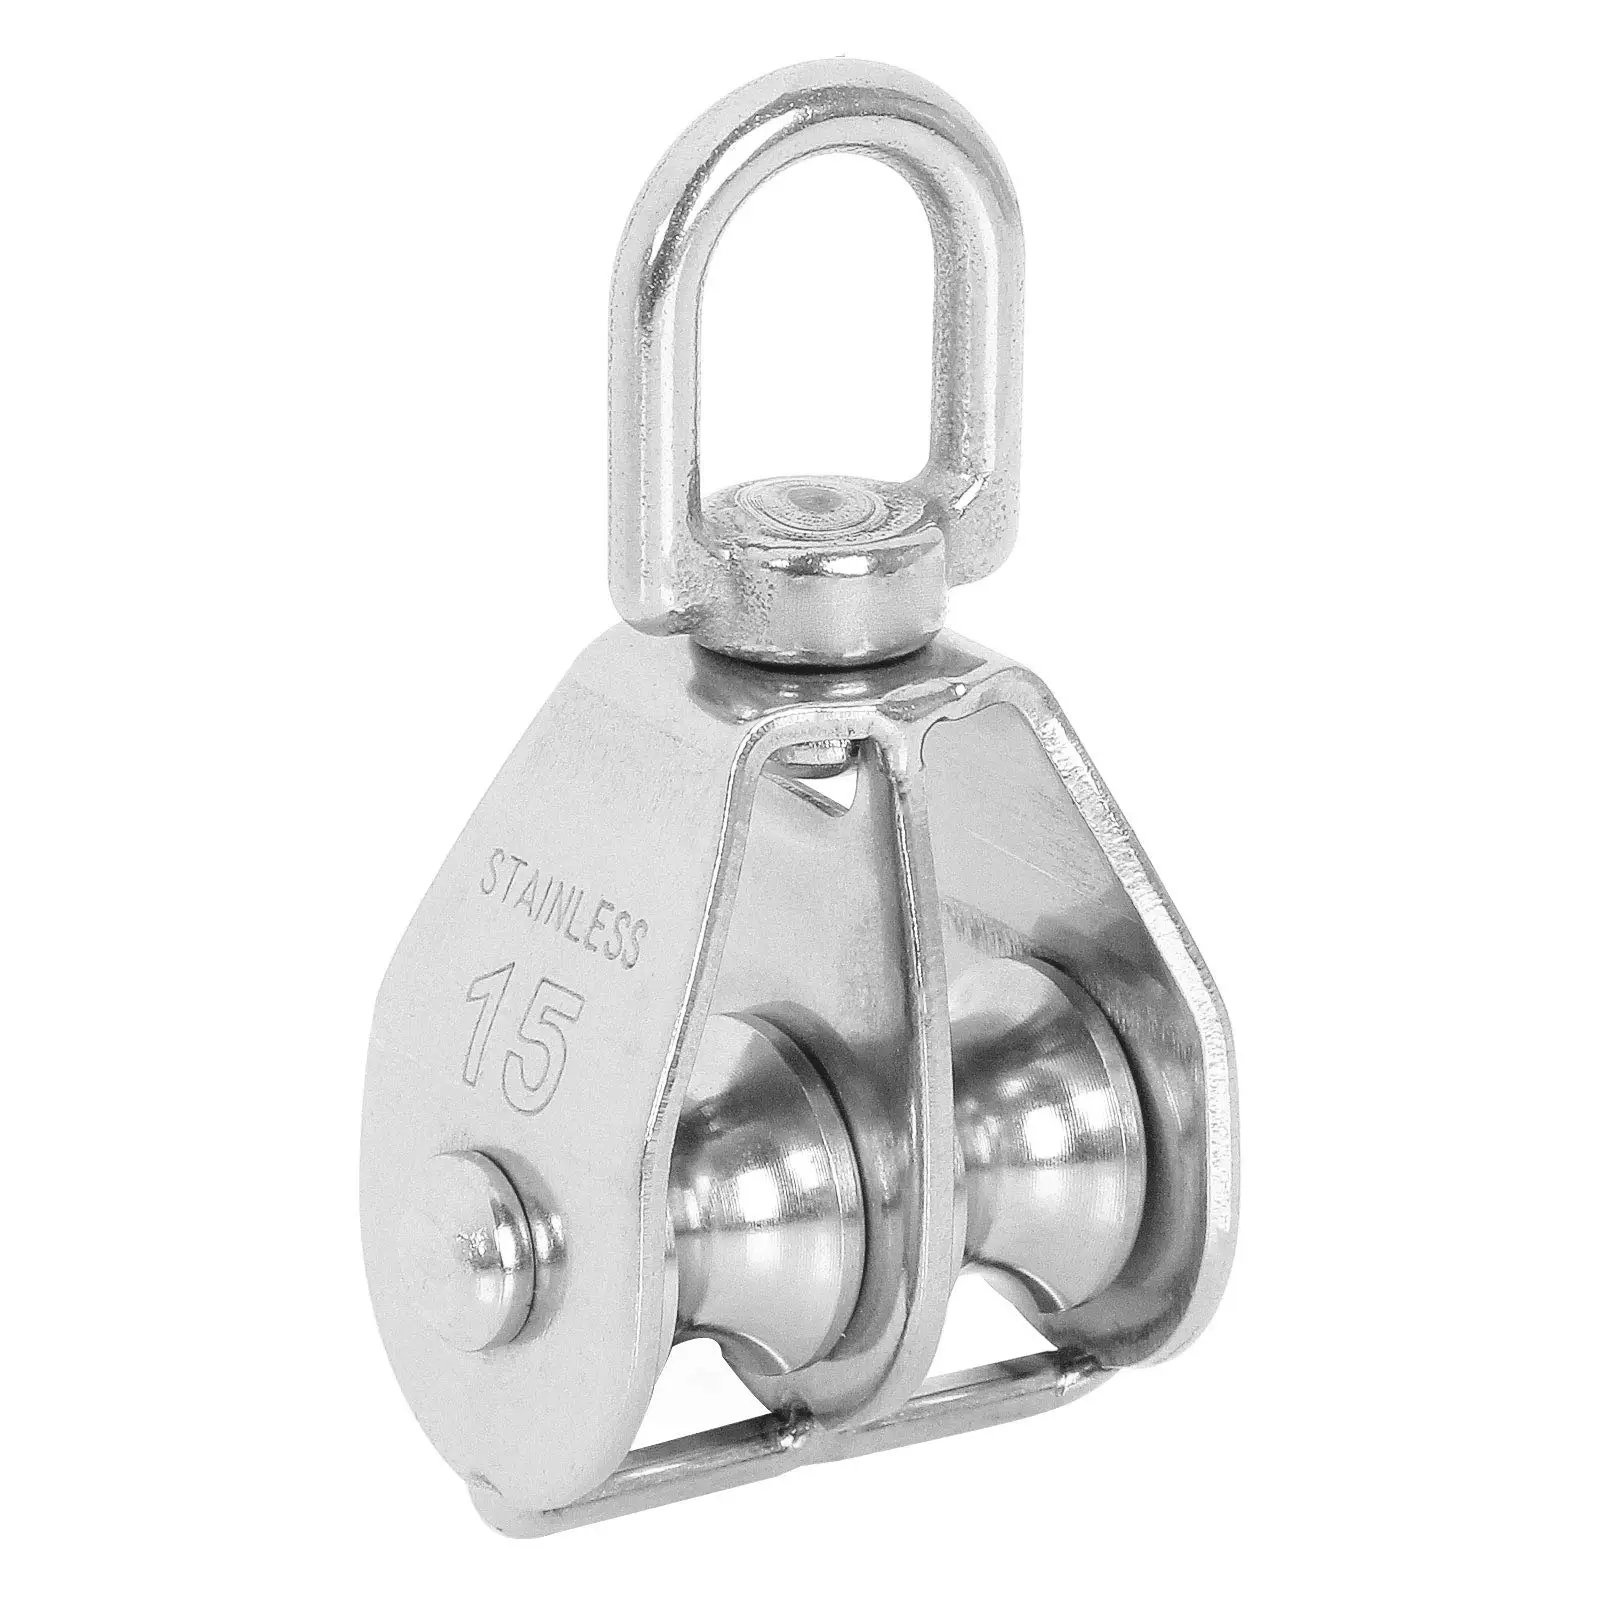 Double Pulley Block Hanging Wire Pulley Roller 304 Stainless Steel Heavy Duty Double Wheel Block Pulley for Lifting Rope (M15) stainless steel 360 degree rotation single wheel pulley and lifting rope roller pulley wheel climbing replacement drop ship